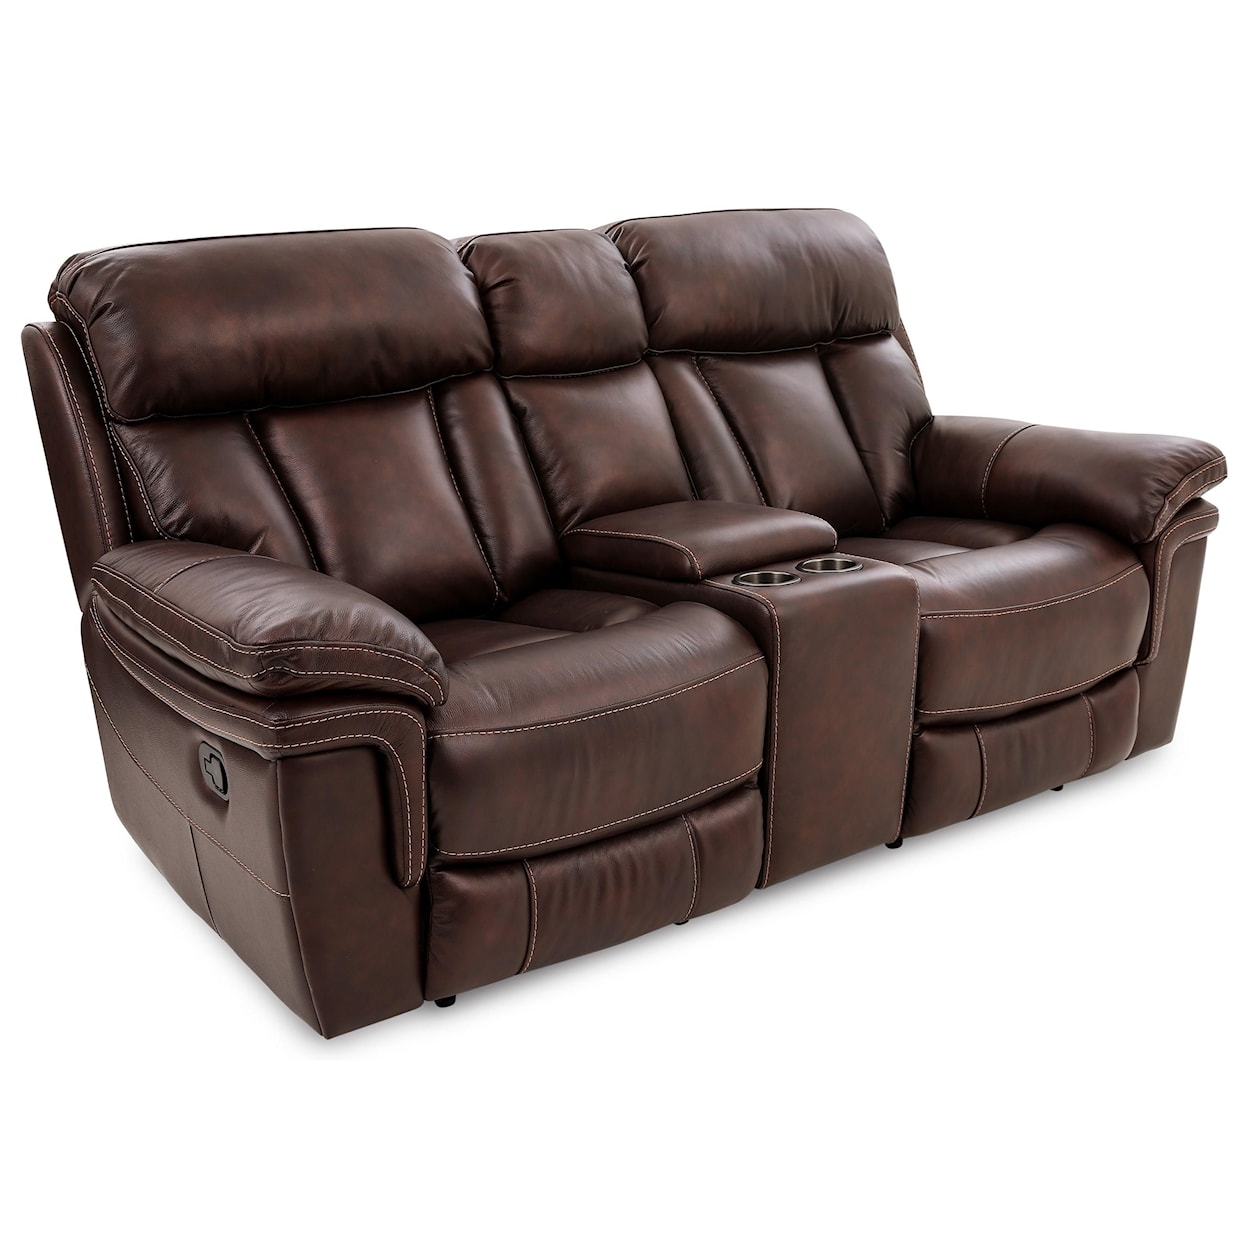 Cheers Bryant LEATHER RECLINING LOVESEAT W/CONSOLE